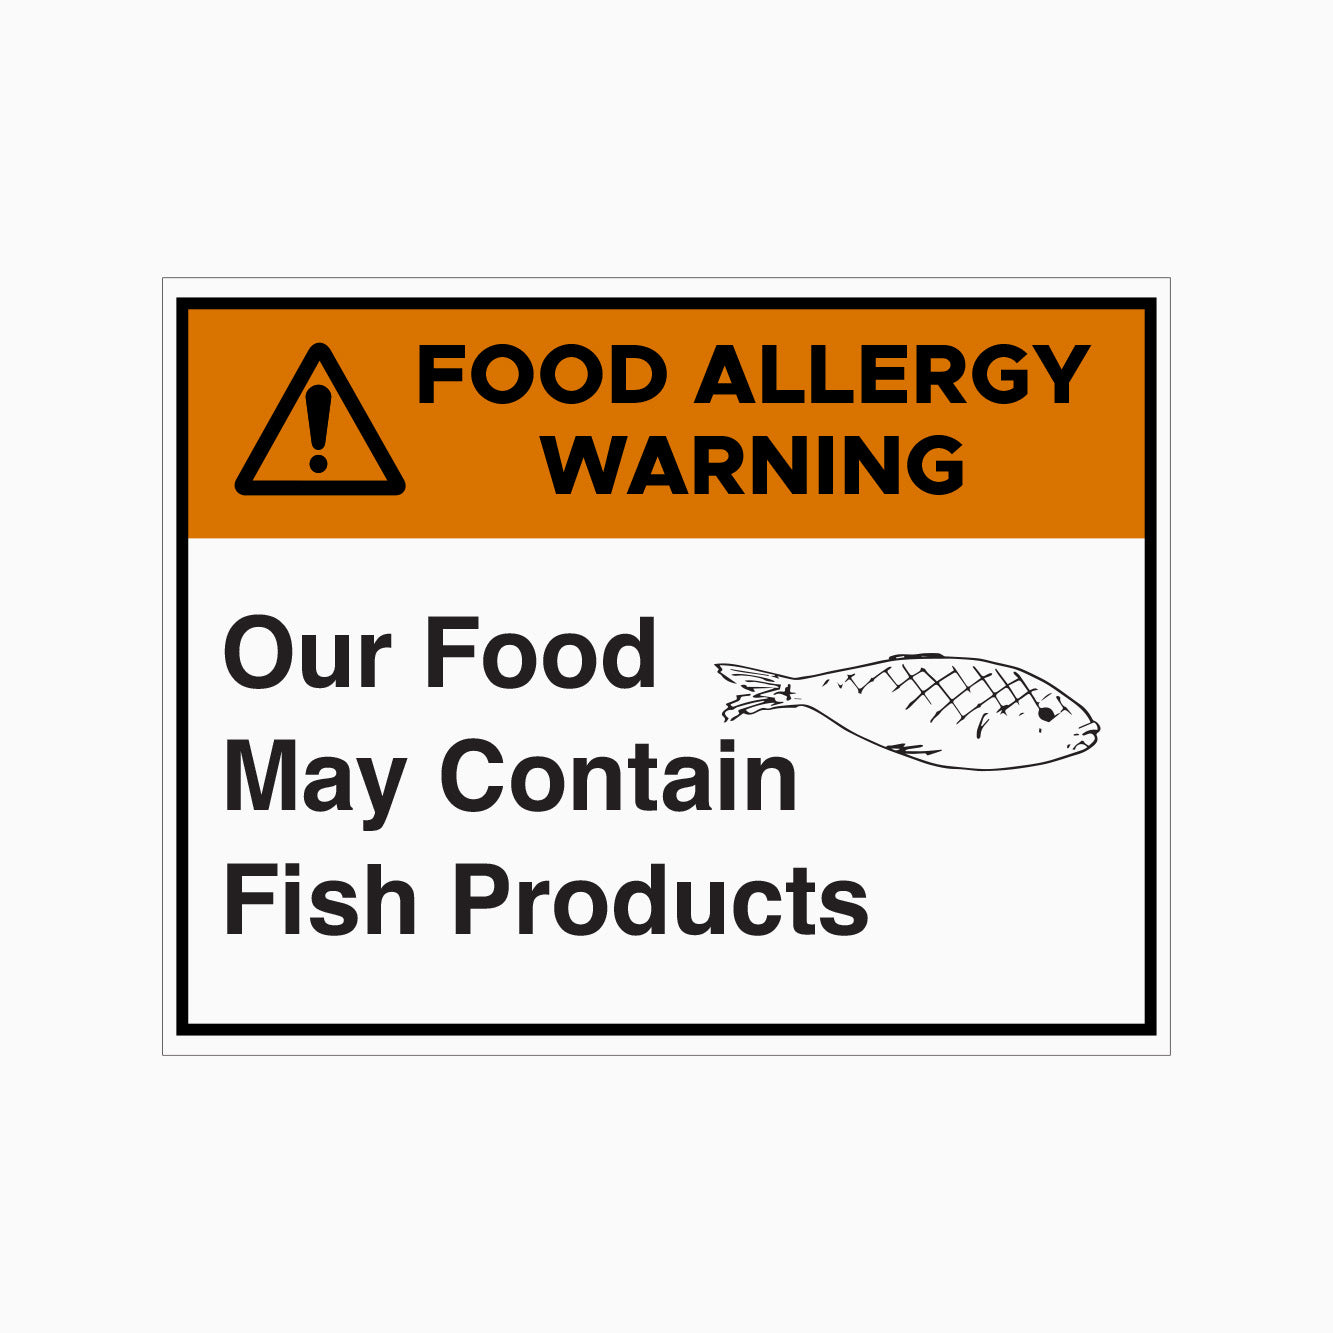 FOOD ALLERGY WARNING SIGN - OUR FOOD MAY CONTAIN FISH PRODUCTS SIGN